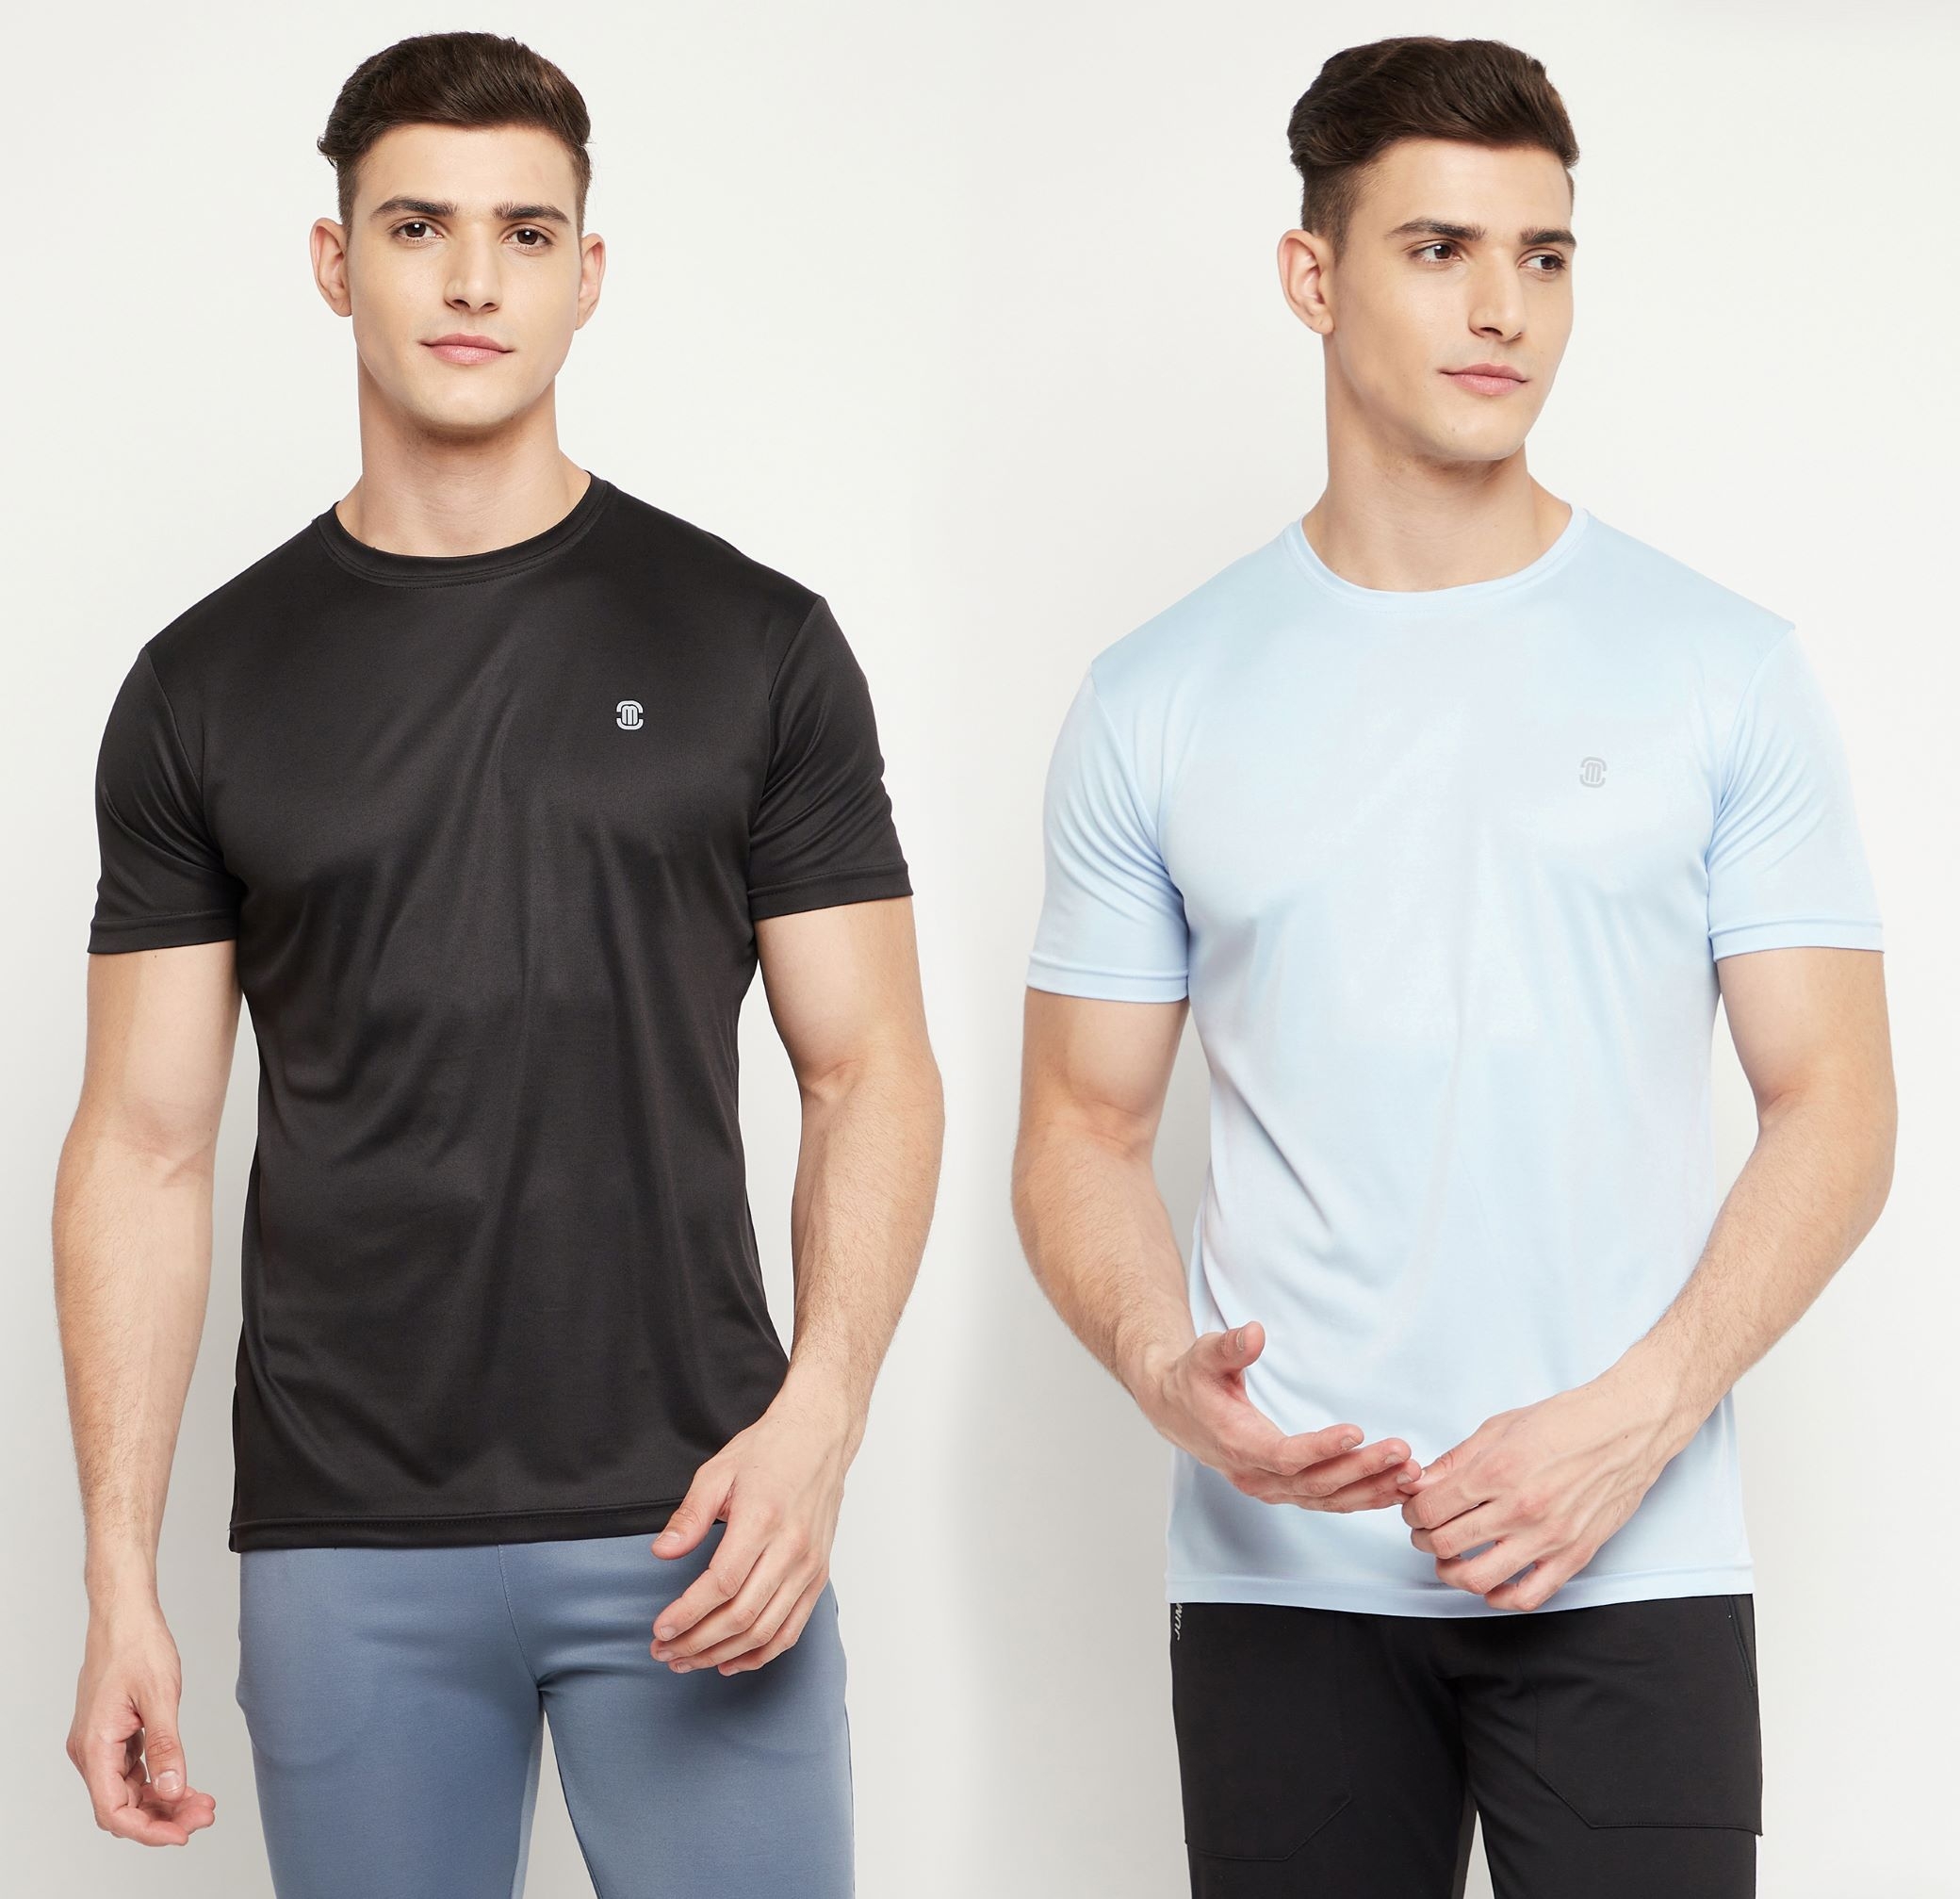 MOZAFIA | Mozafia Combo Pack of Round Neck Short Sleeves Sportswear T-shirt For Men 0